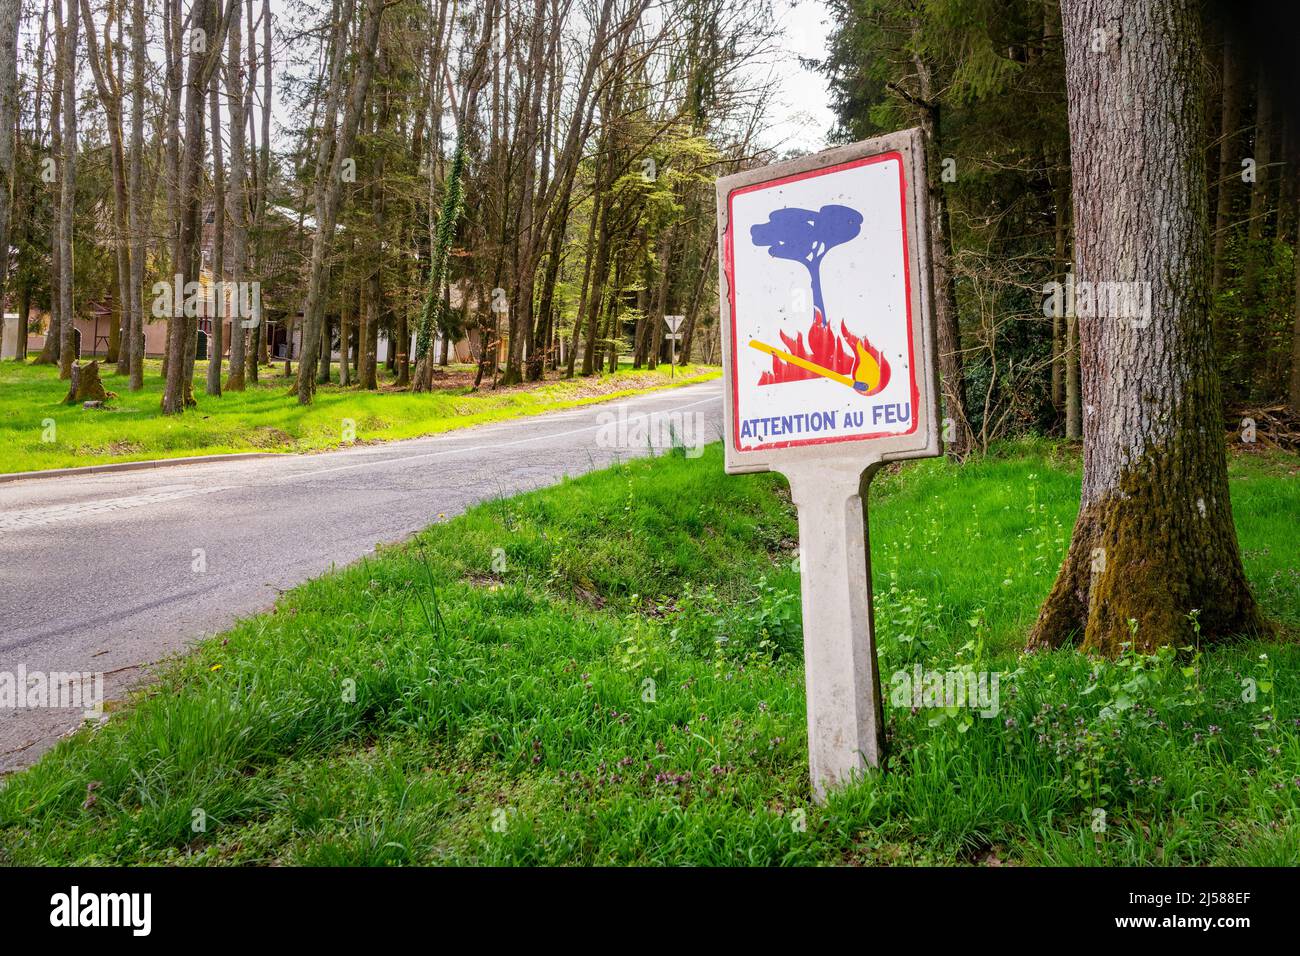 Attention au feu (caution fire hazard), vintage old french roadsign in woods Stock Photo